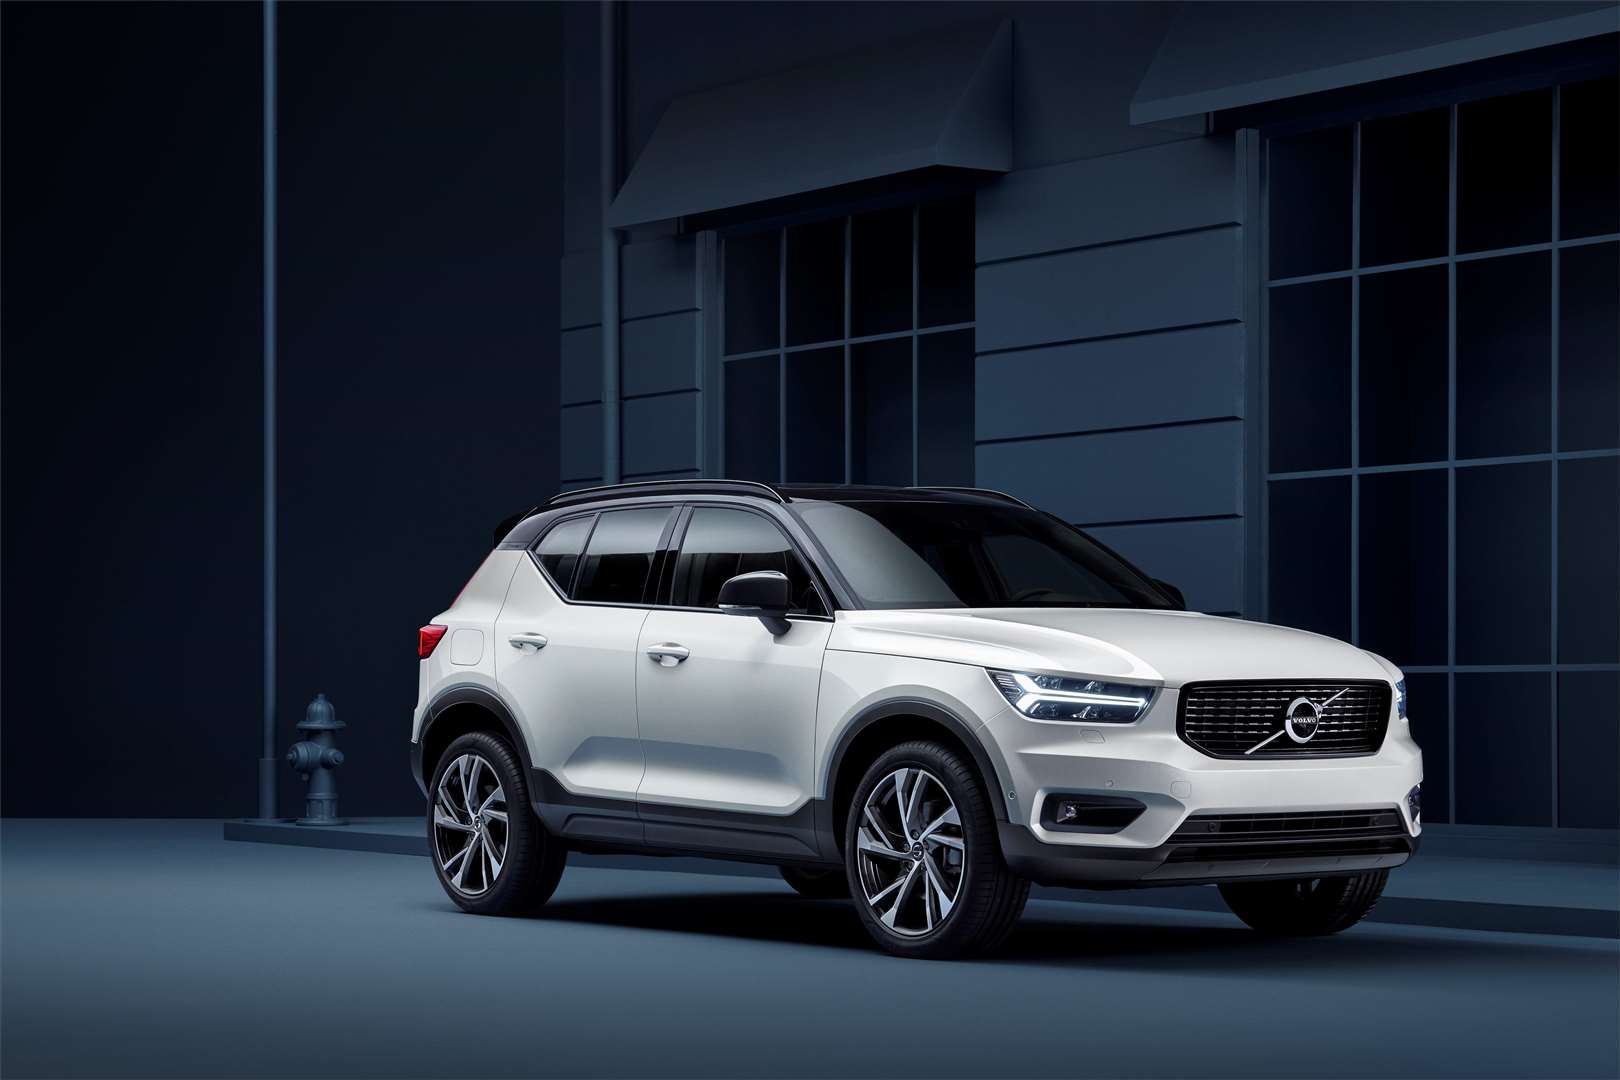 It takes Volvo’s design ethos in a funkier, more youthful direction (4620327)